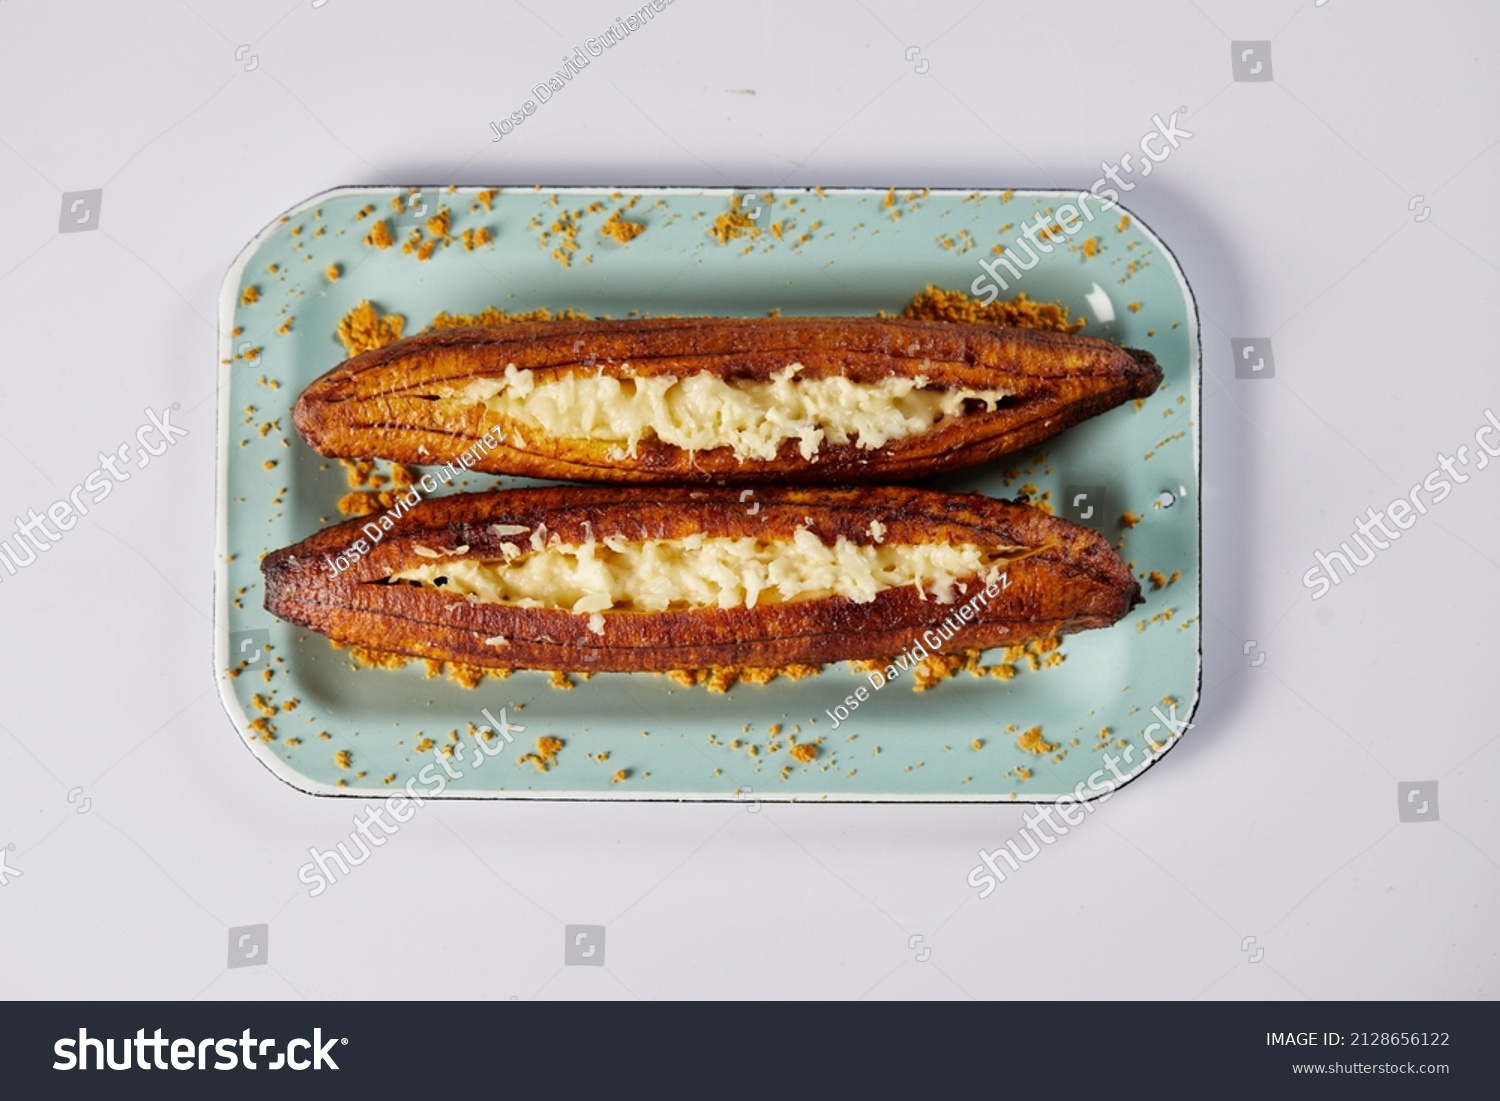 Ecuadorian maduro con queso consists of baked ripe plantains stuffed with cheese. It’s on a white background.  #2128656122